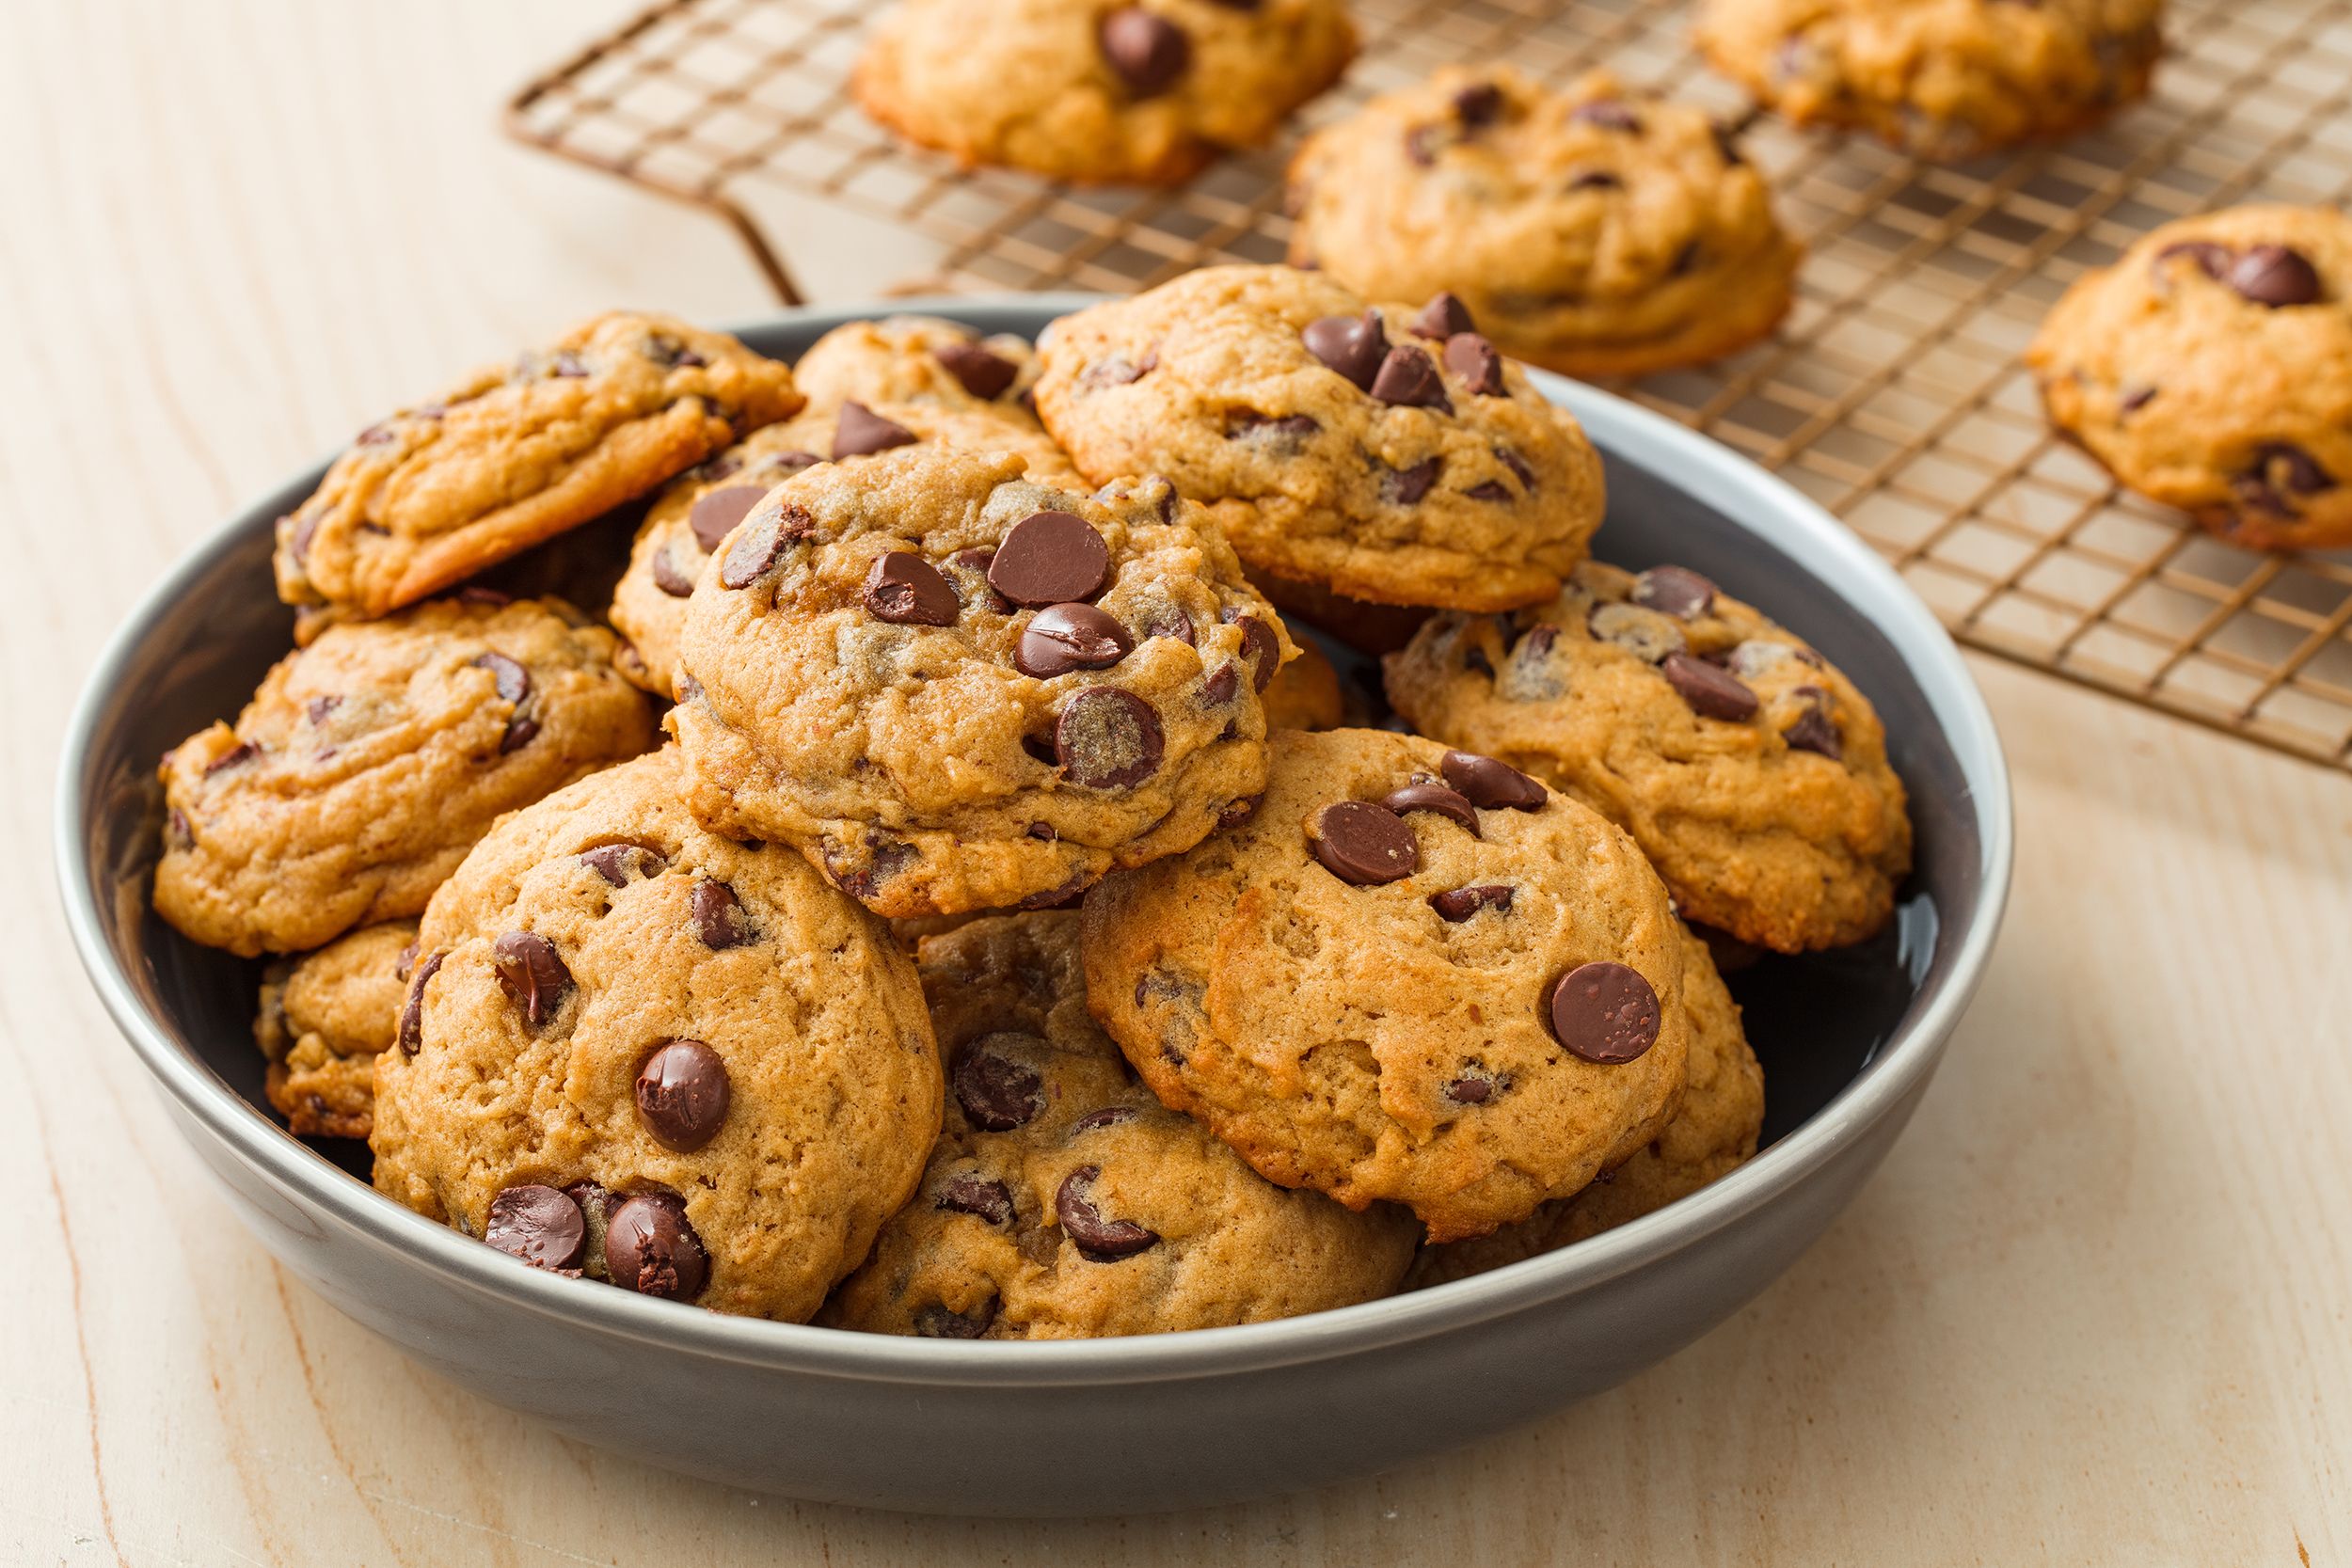 85+ Best Cookie Recipes - Easy Recipes for Homemade Cookies